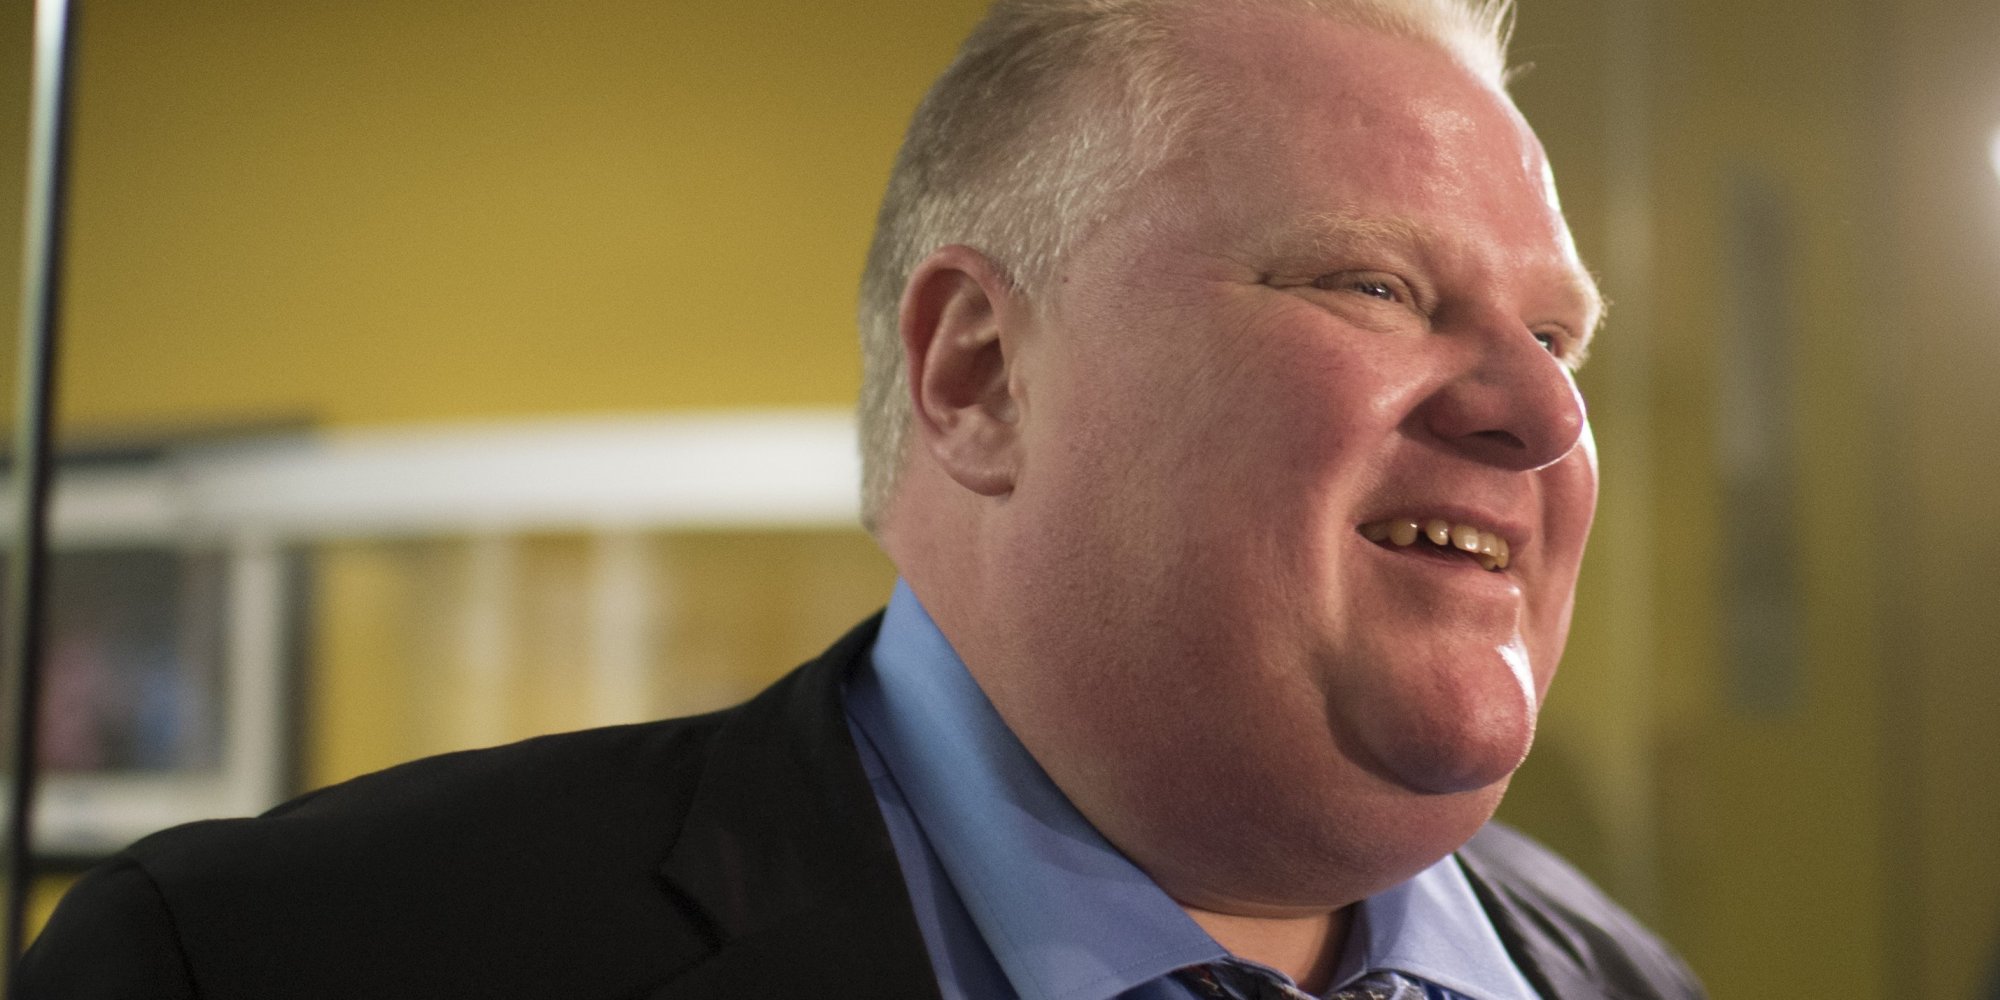 Rob ford wants to become prime minister #9